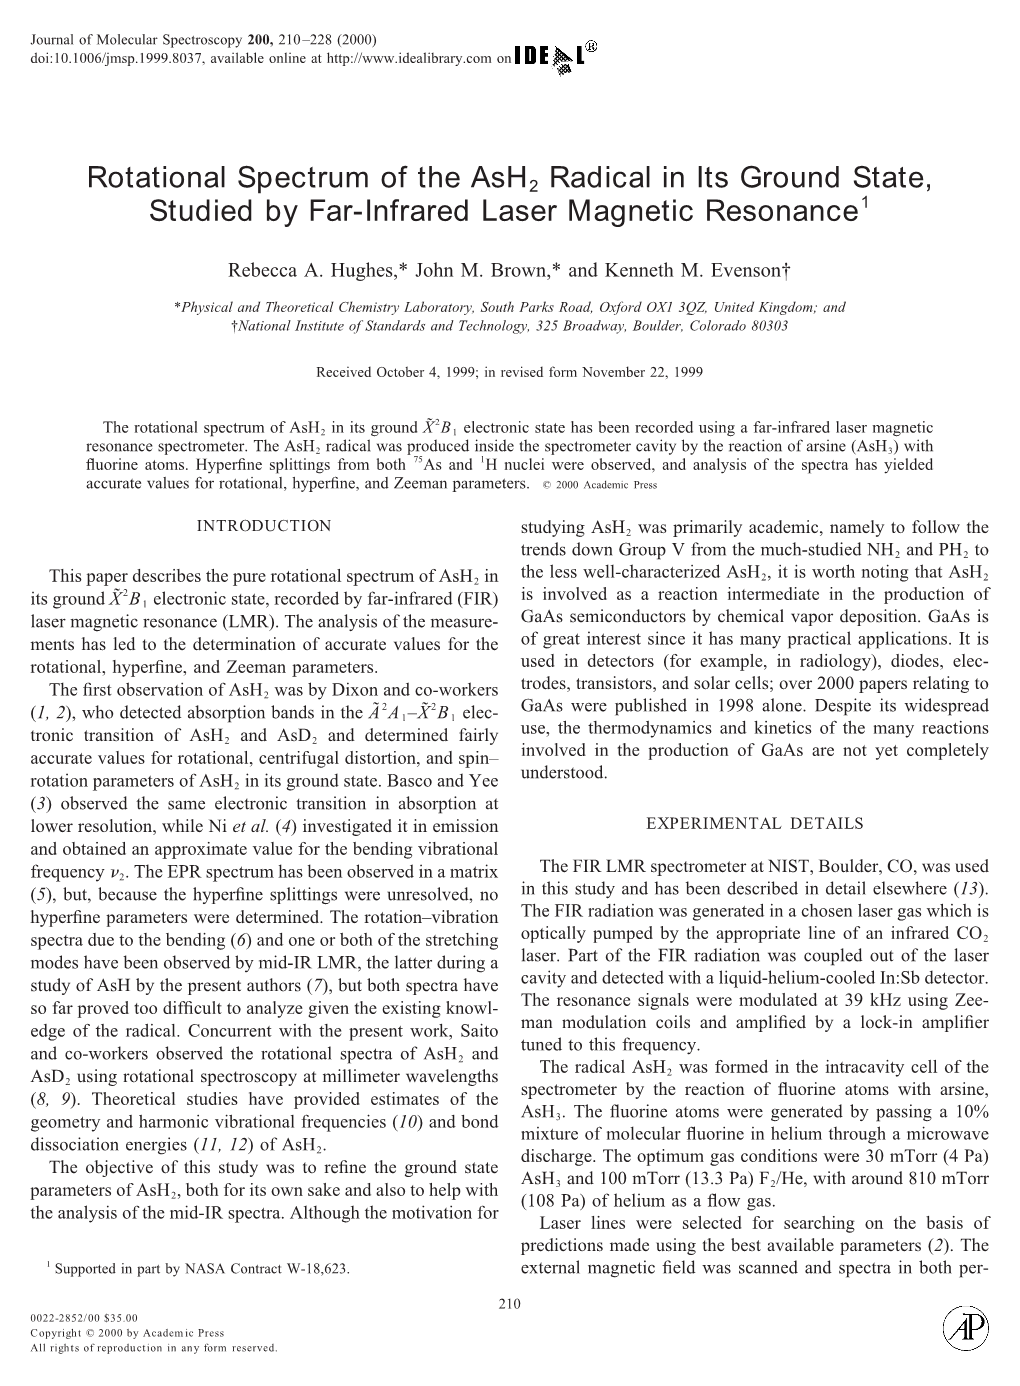 Rotational Spectrum of the Ash2 Radical in Its Ground State, Studied by Far-Infrared Laser Magnetic Resonance1